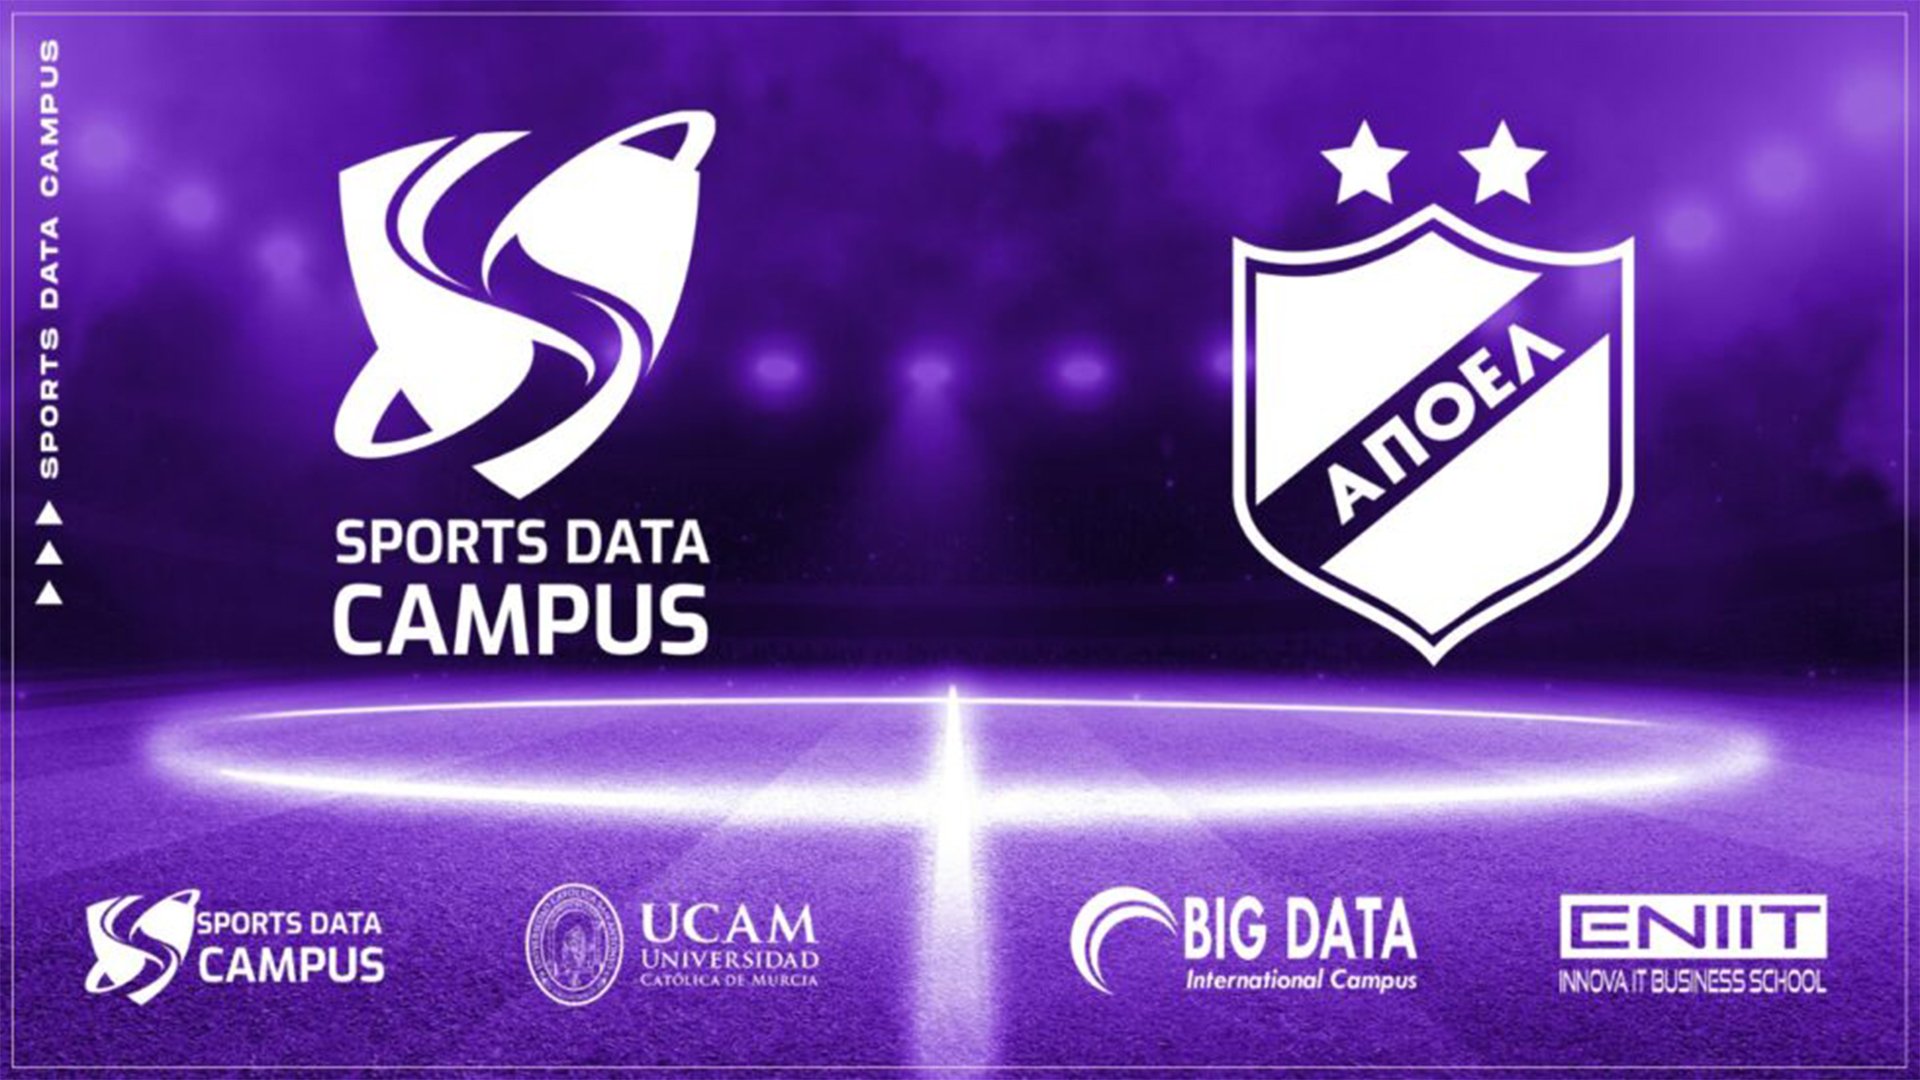 COVER_SPORTS DATA CAMPUS